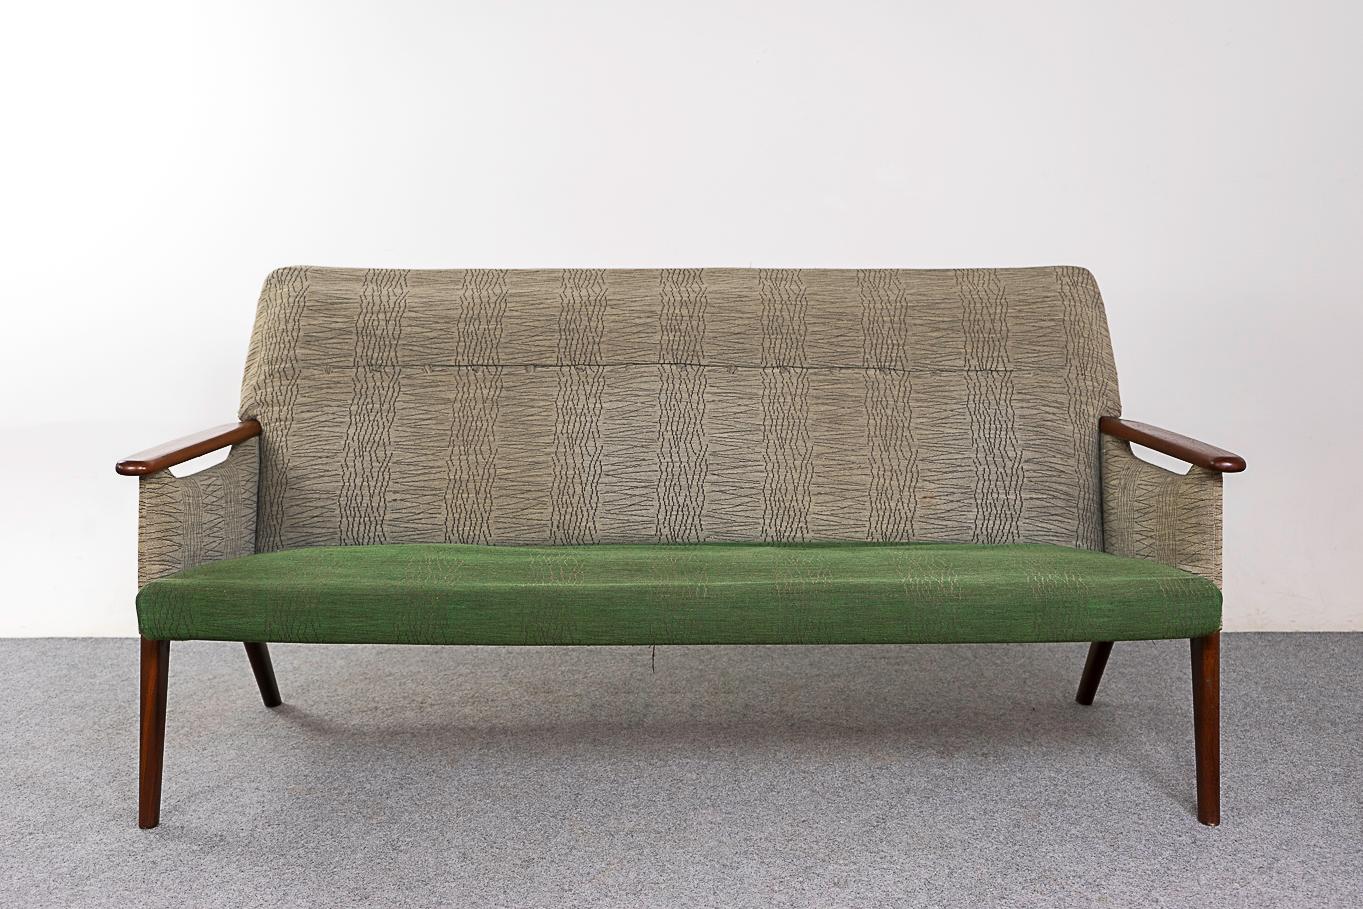 Teak Danish sofa circa 1960's. Elegant lines with floating solid wood armrests and  sleek legs. Original upholstery with significant wear, foam requires immediate replacement.

Unrestored item with option to purchase in restored condition for an